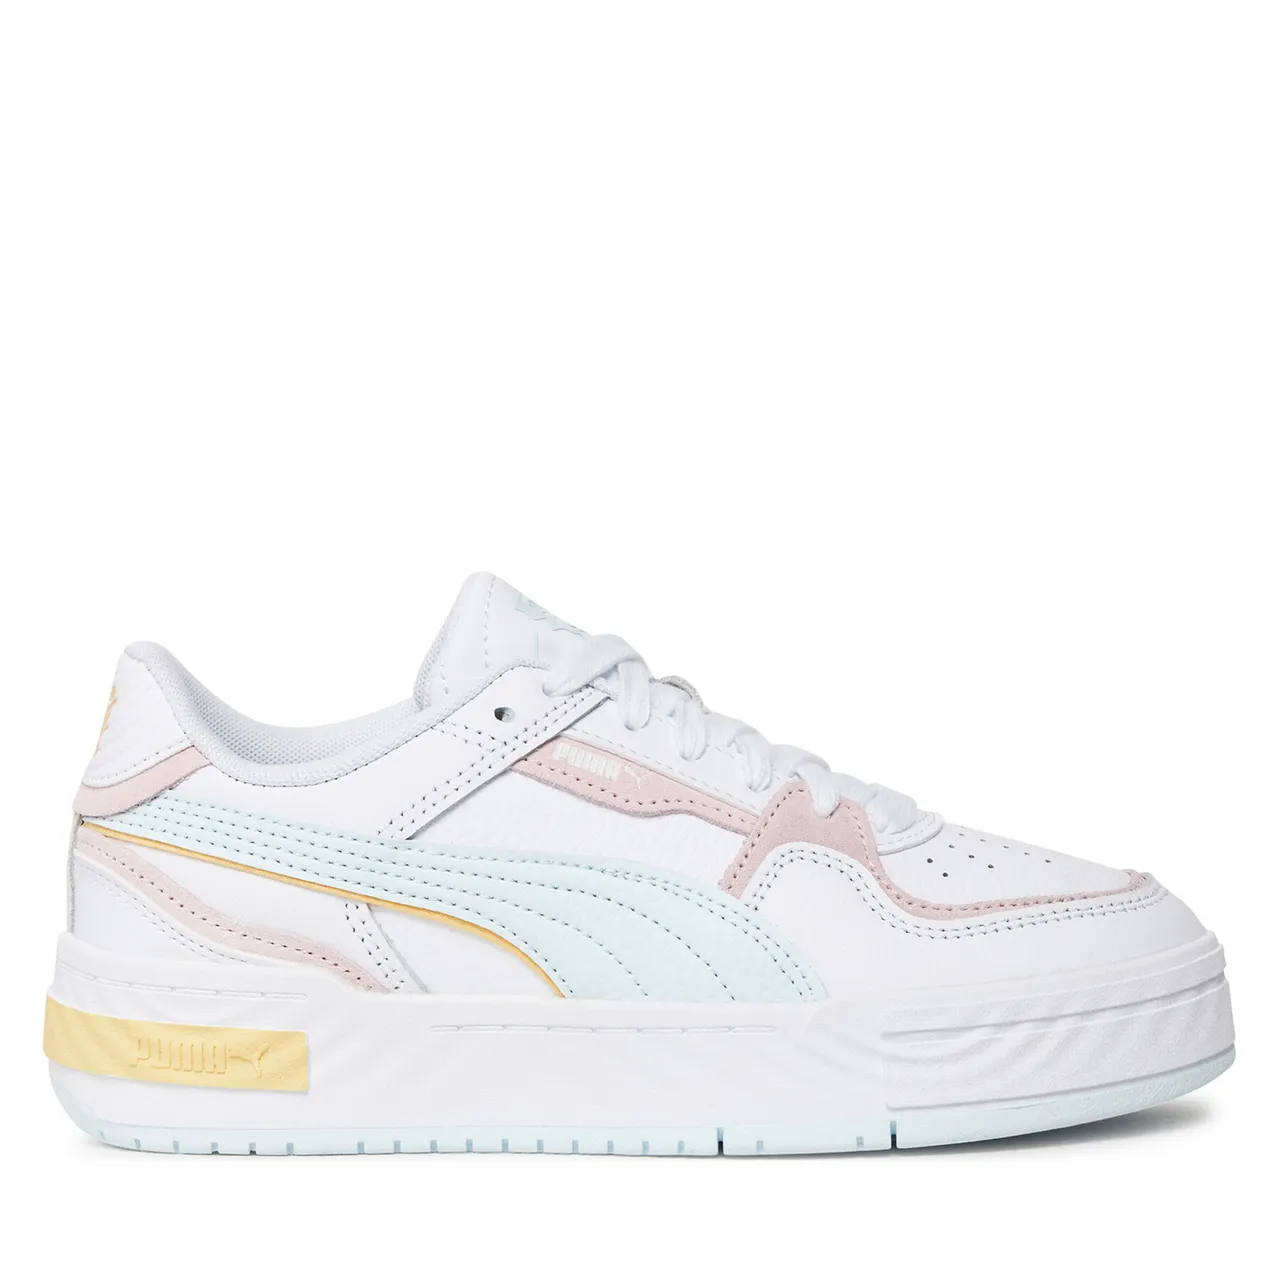 Sneakers Puma Ca Pro Crush Earth 395773 08 Puma White/Whisp Of Pink/Dewdrop